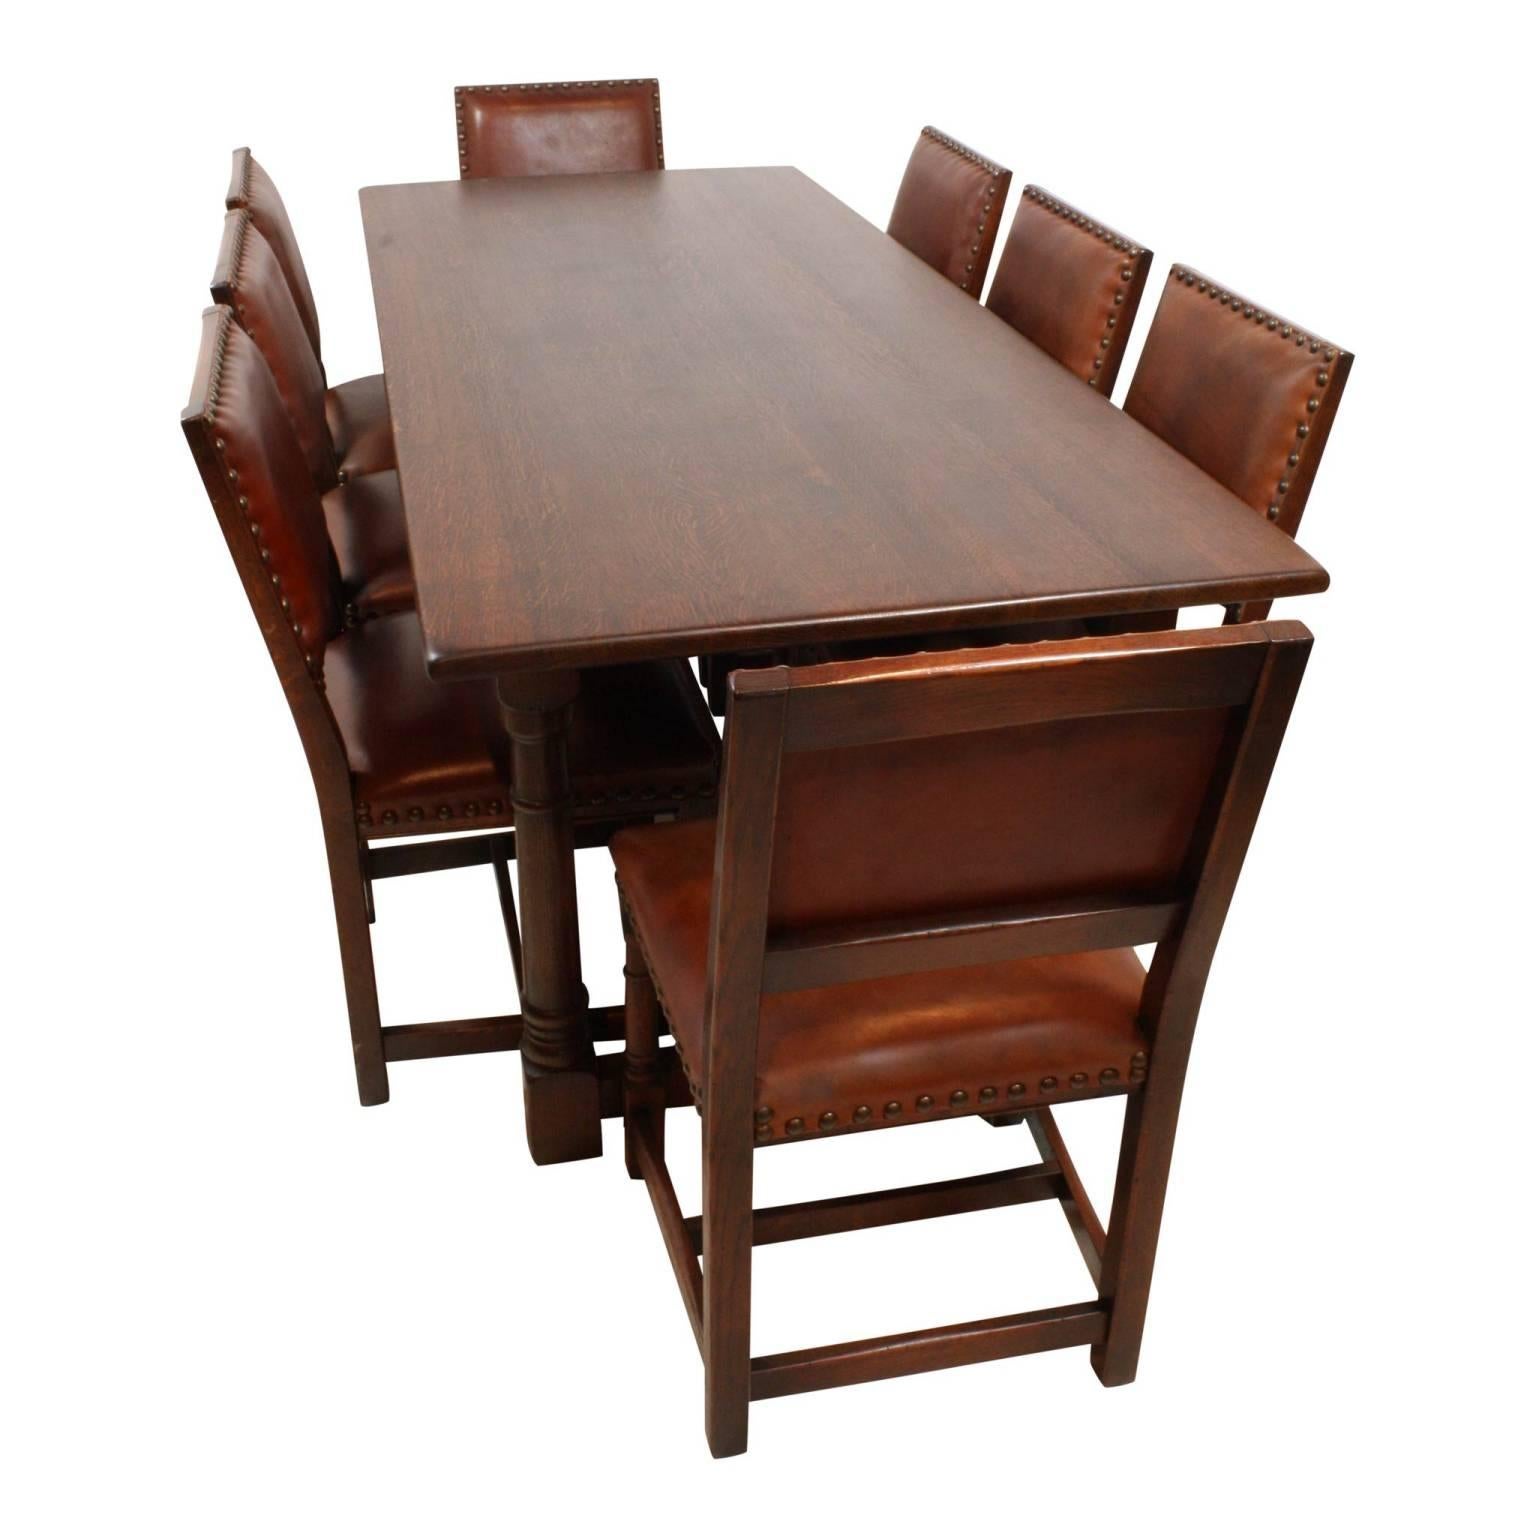 Mid-20th Century Oak Dining Room Table with Eight Leather Chairs